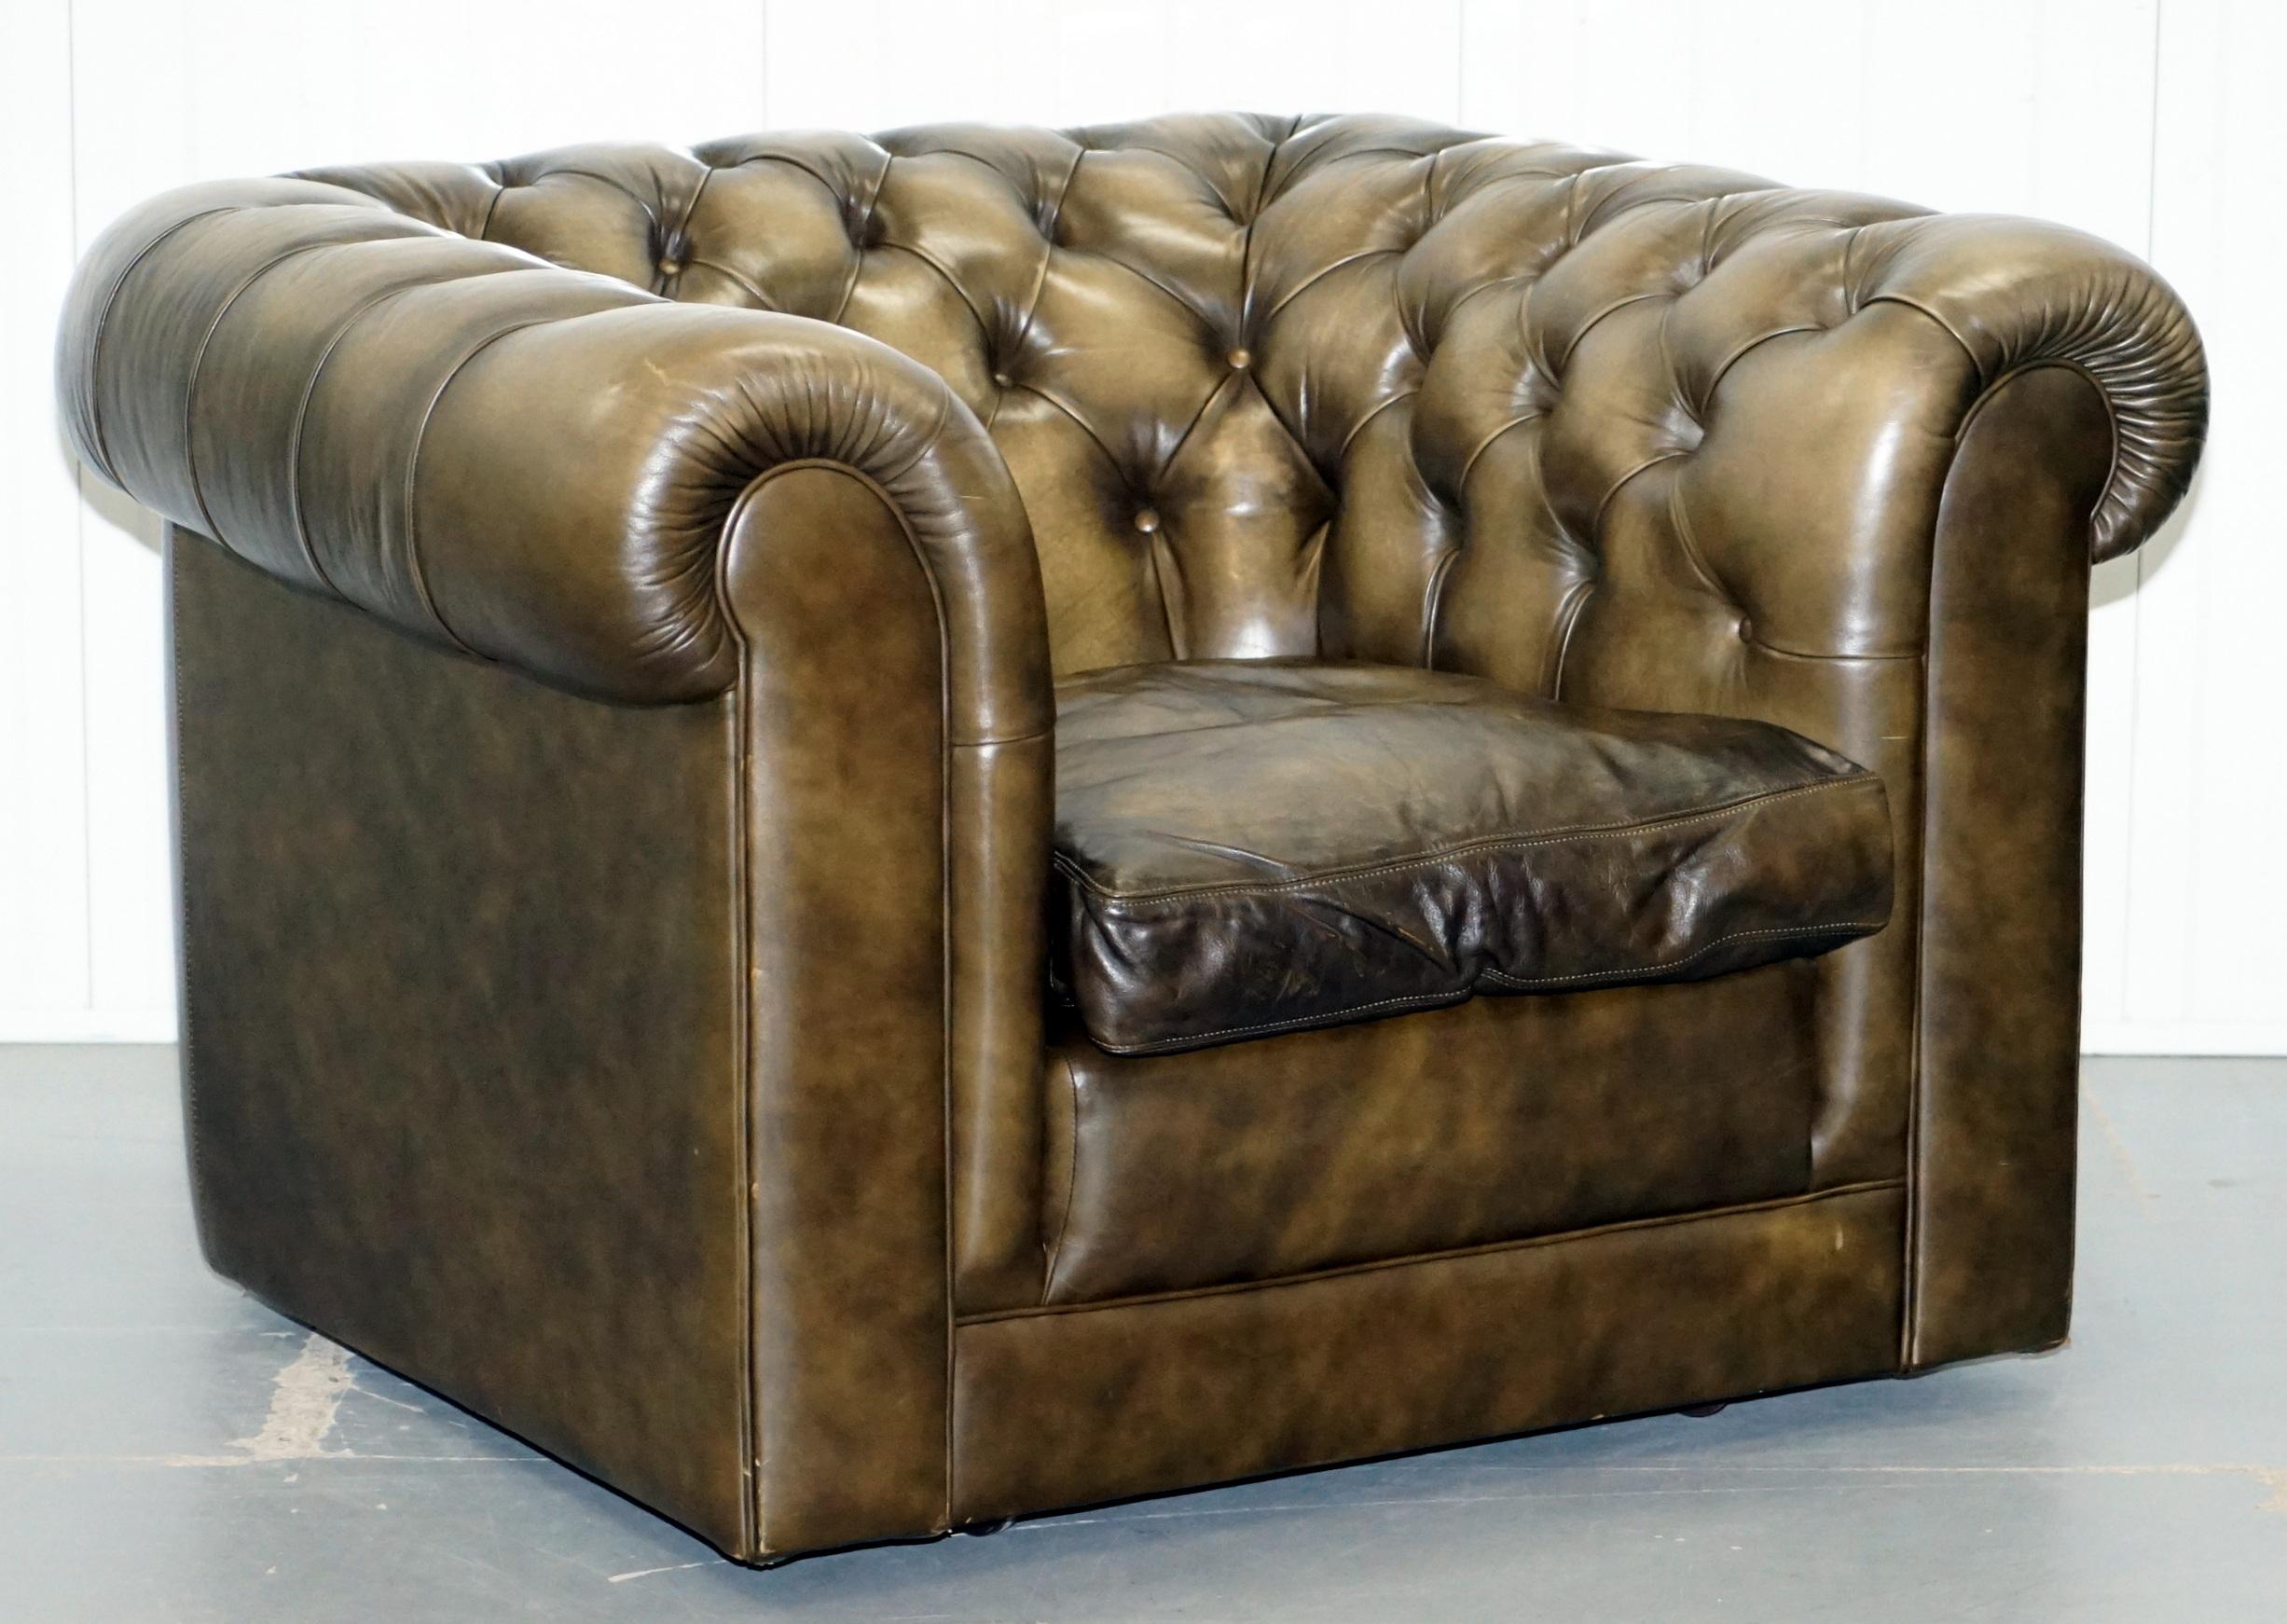 We are delighted to offer for sale one of two pairs of lovely vintage Chesterfield leather club armchairs with down filled feather cushions

The chairs are a lovely brownish green color, very 1960s, the cushions are down filled and very comfortable,